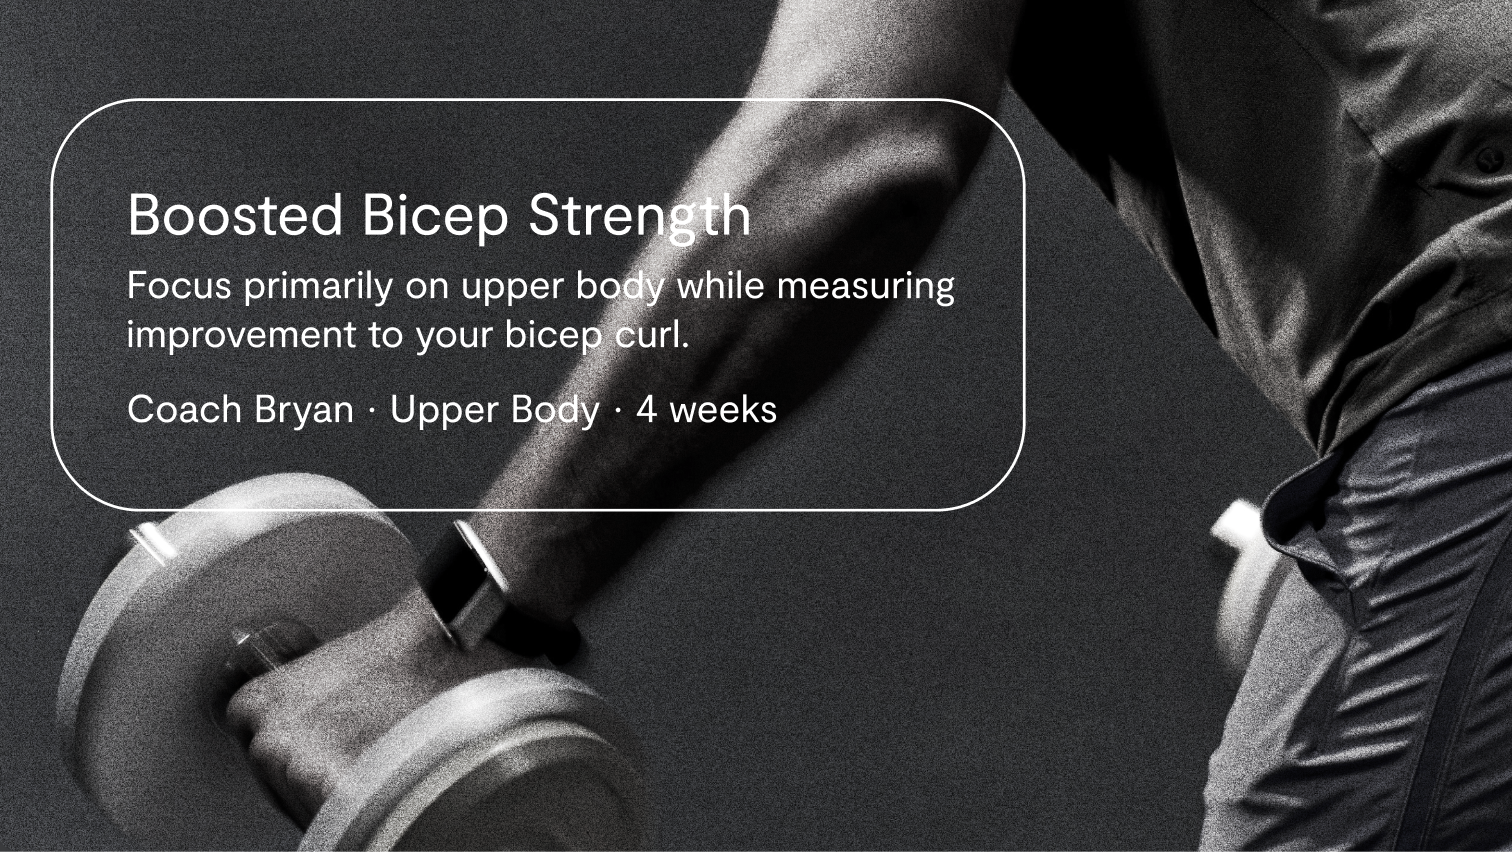 Training Plan Boosted Bicep Strength